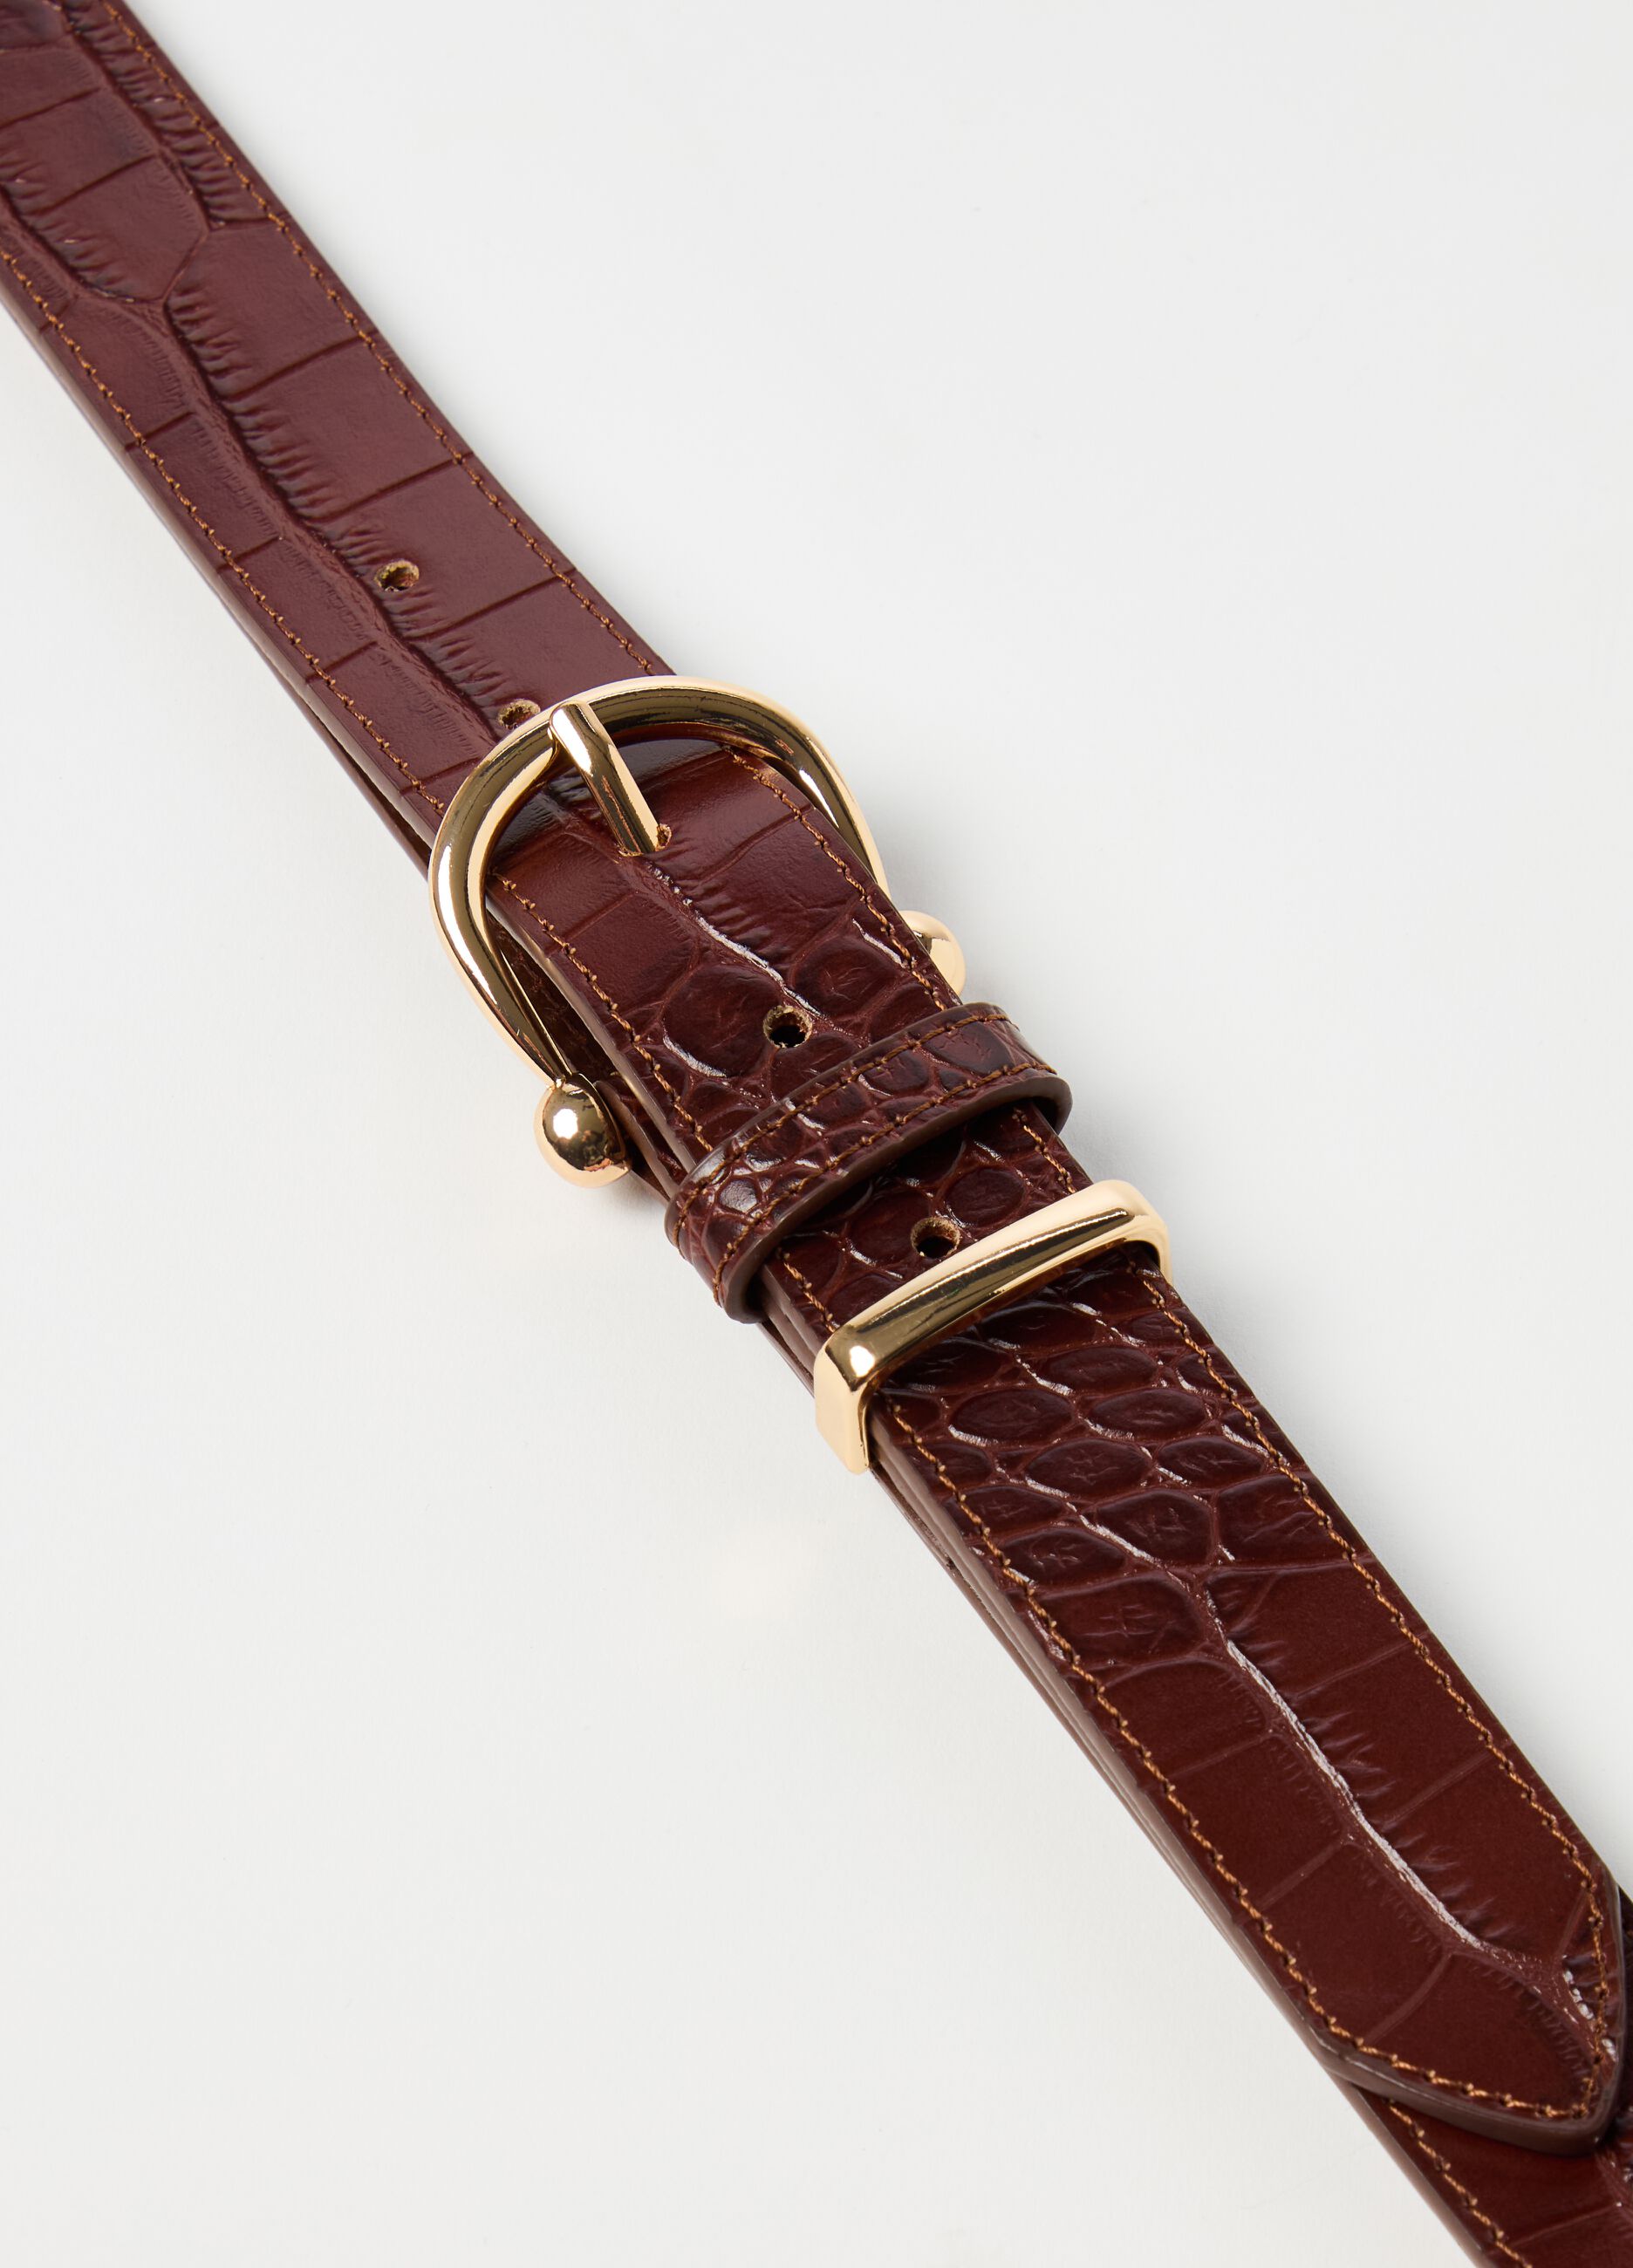 Contemporary belt in textured leather